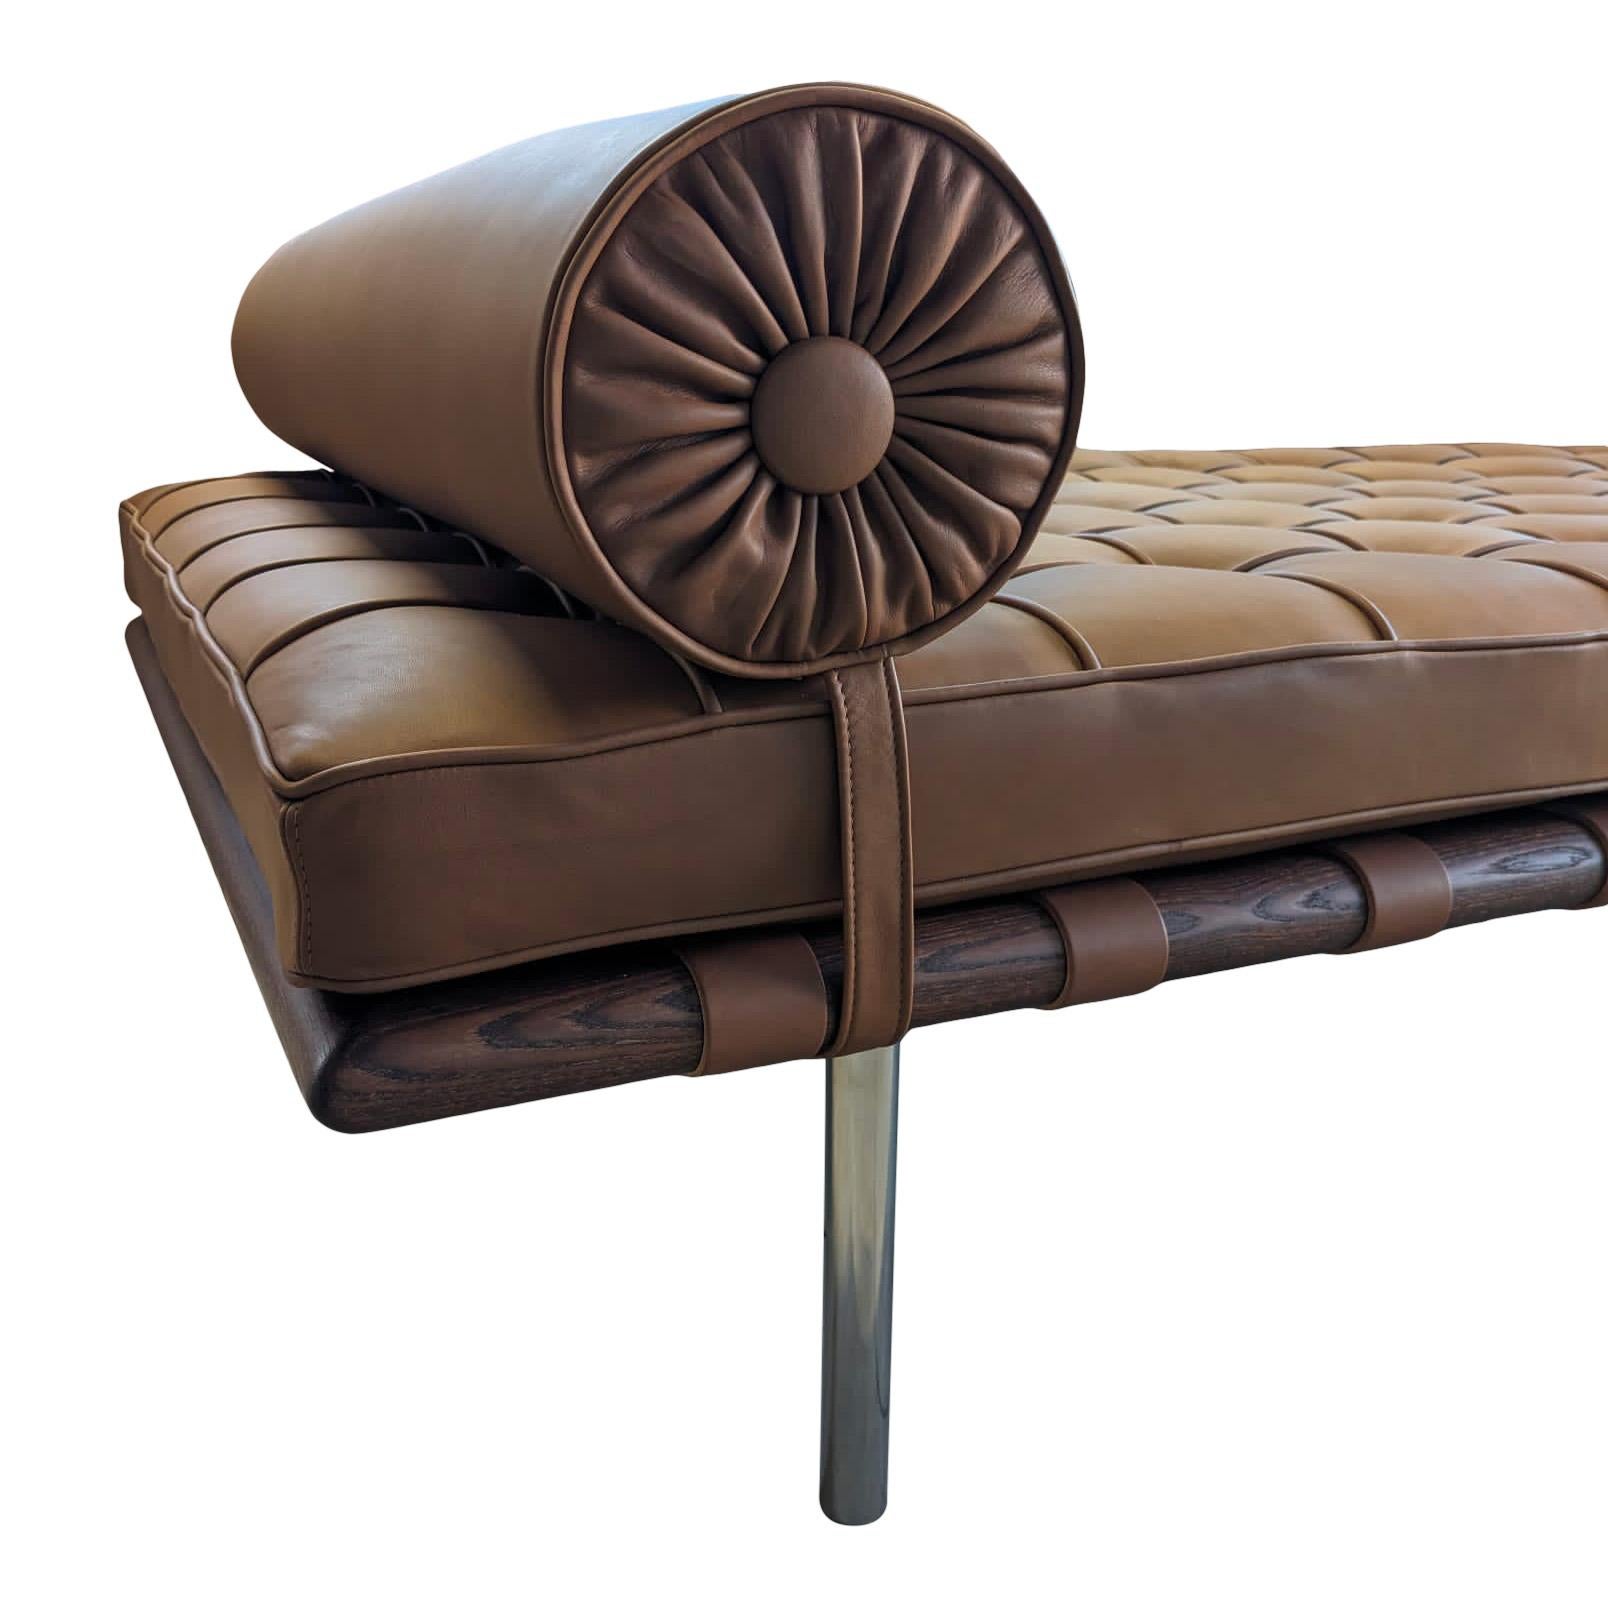 Late 20th Century Ludwig Mies Van Der Rohe Bauhaus Coffee Leather Barcelona Daybed for Knoll, 1970 For Sale